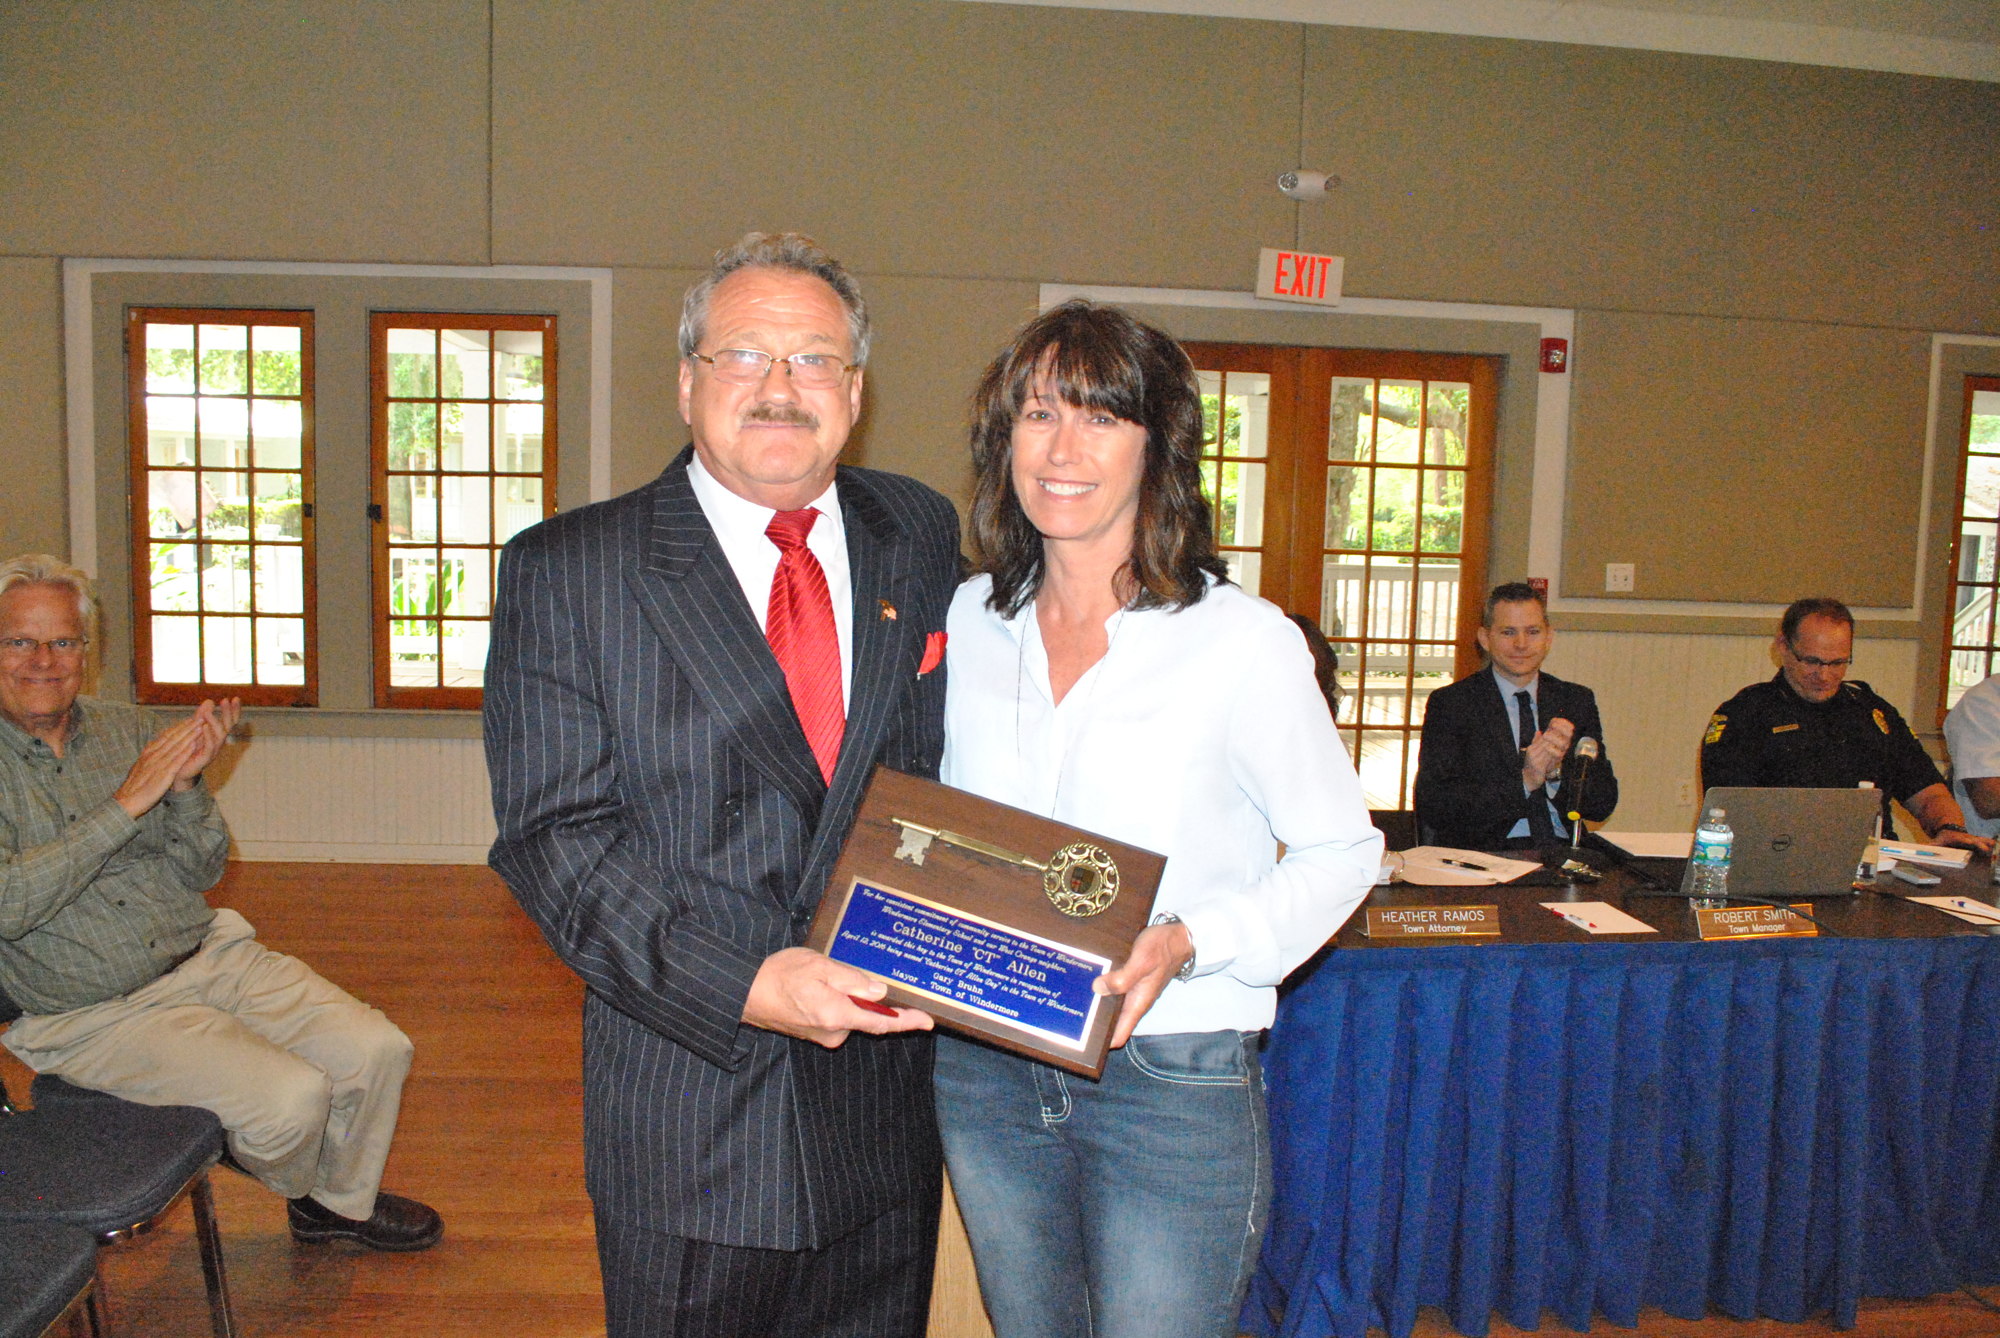 Catherine Allen received a key to the town for her outstanding contributions.